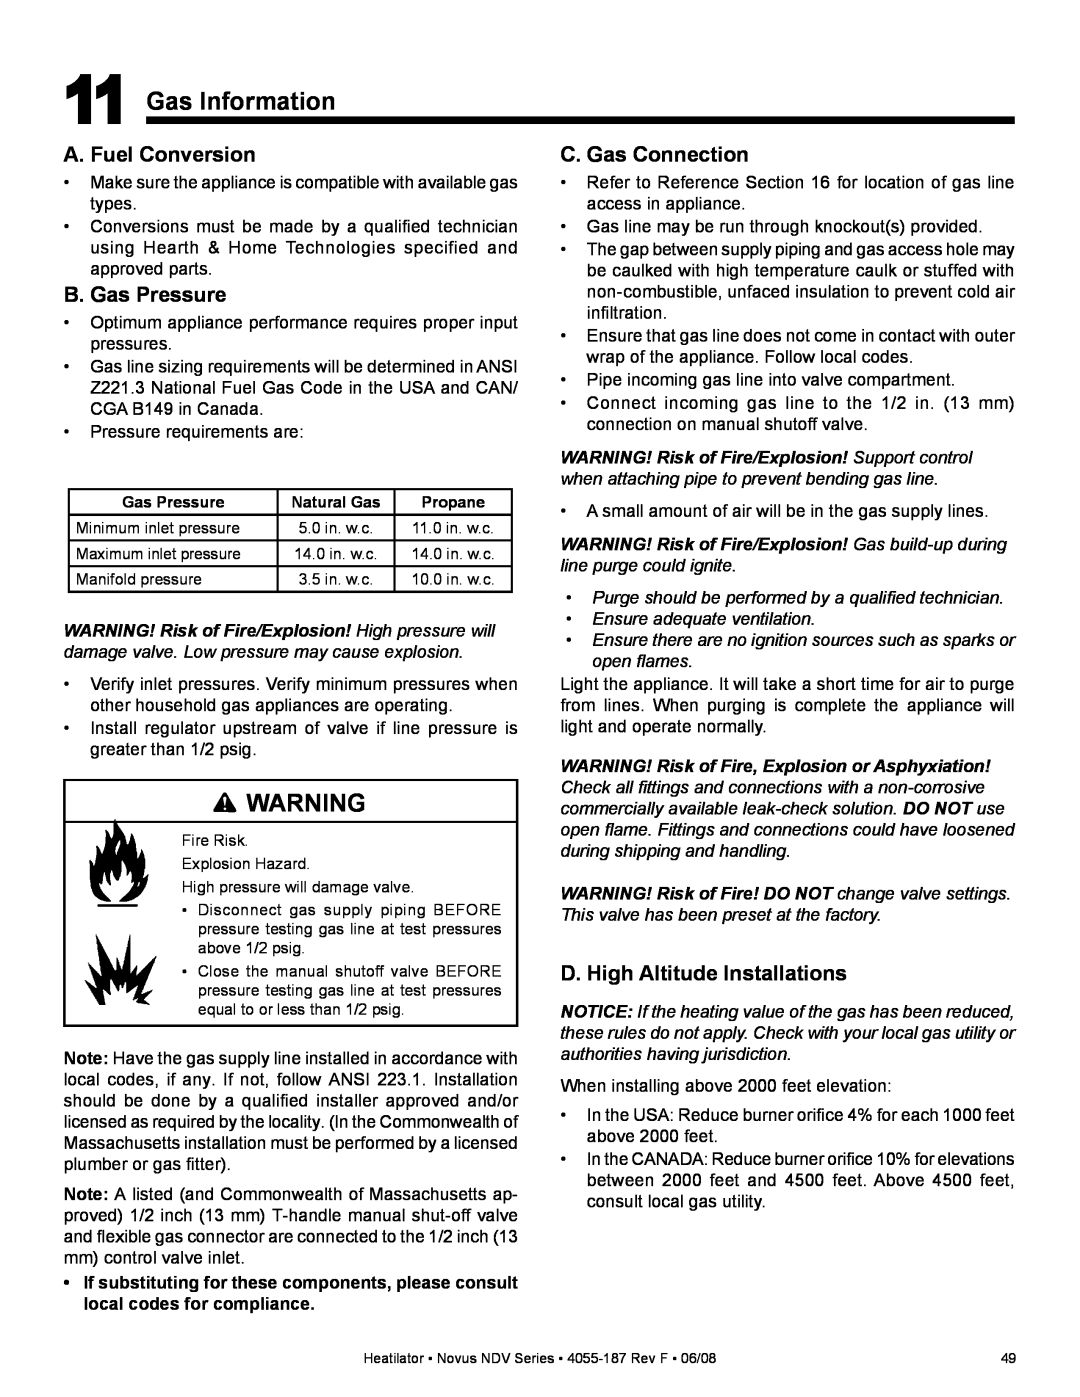 Hearth and Home Technologies NDV3630, NDV4236IL Gas Information, A. Fuel Conversion, B. Gas Pressure, C. Gas Connection 